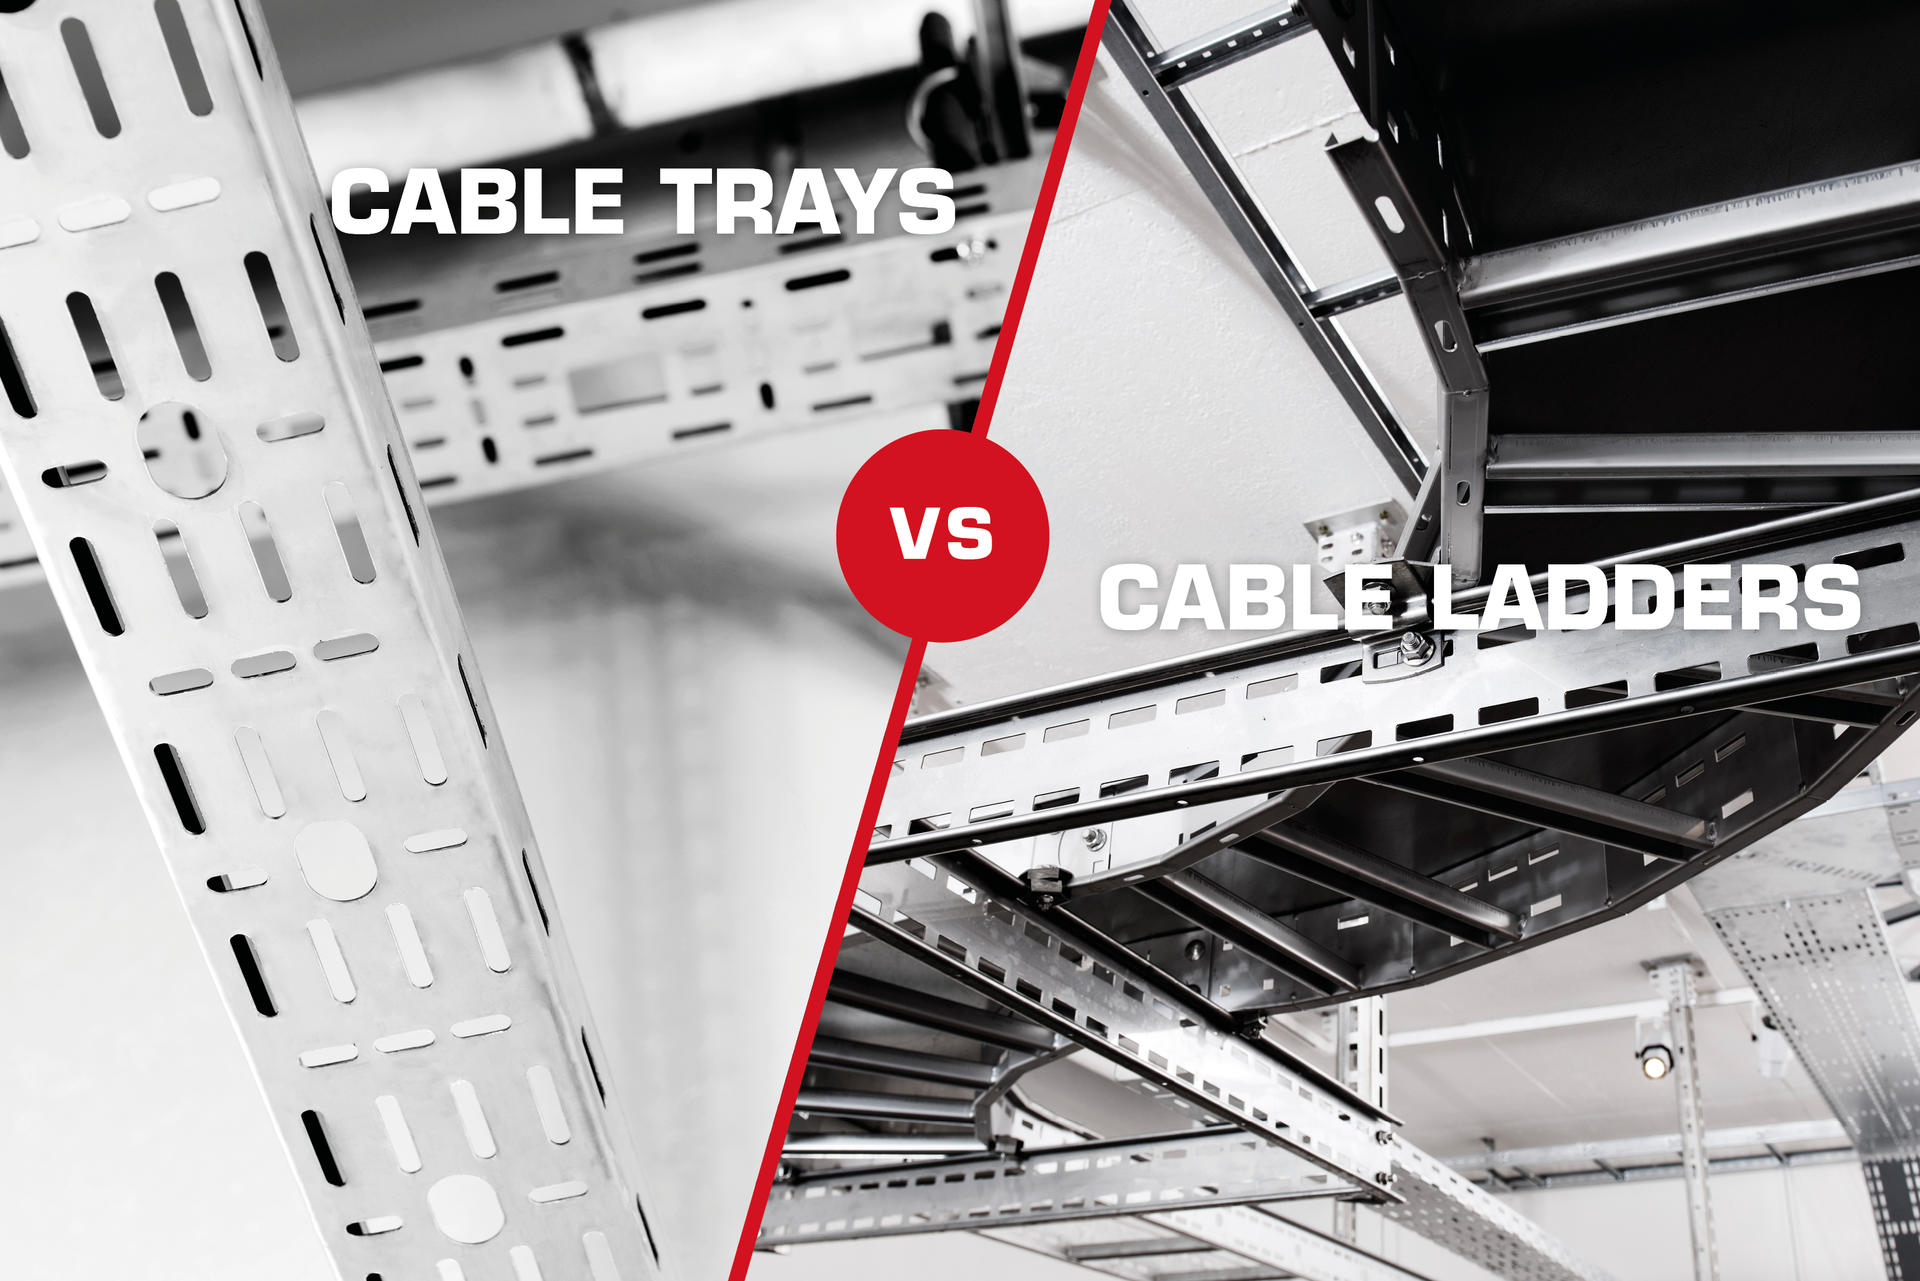 What is the difference between cable ladders and cable trays